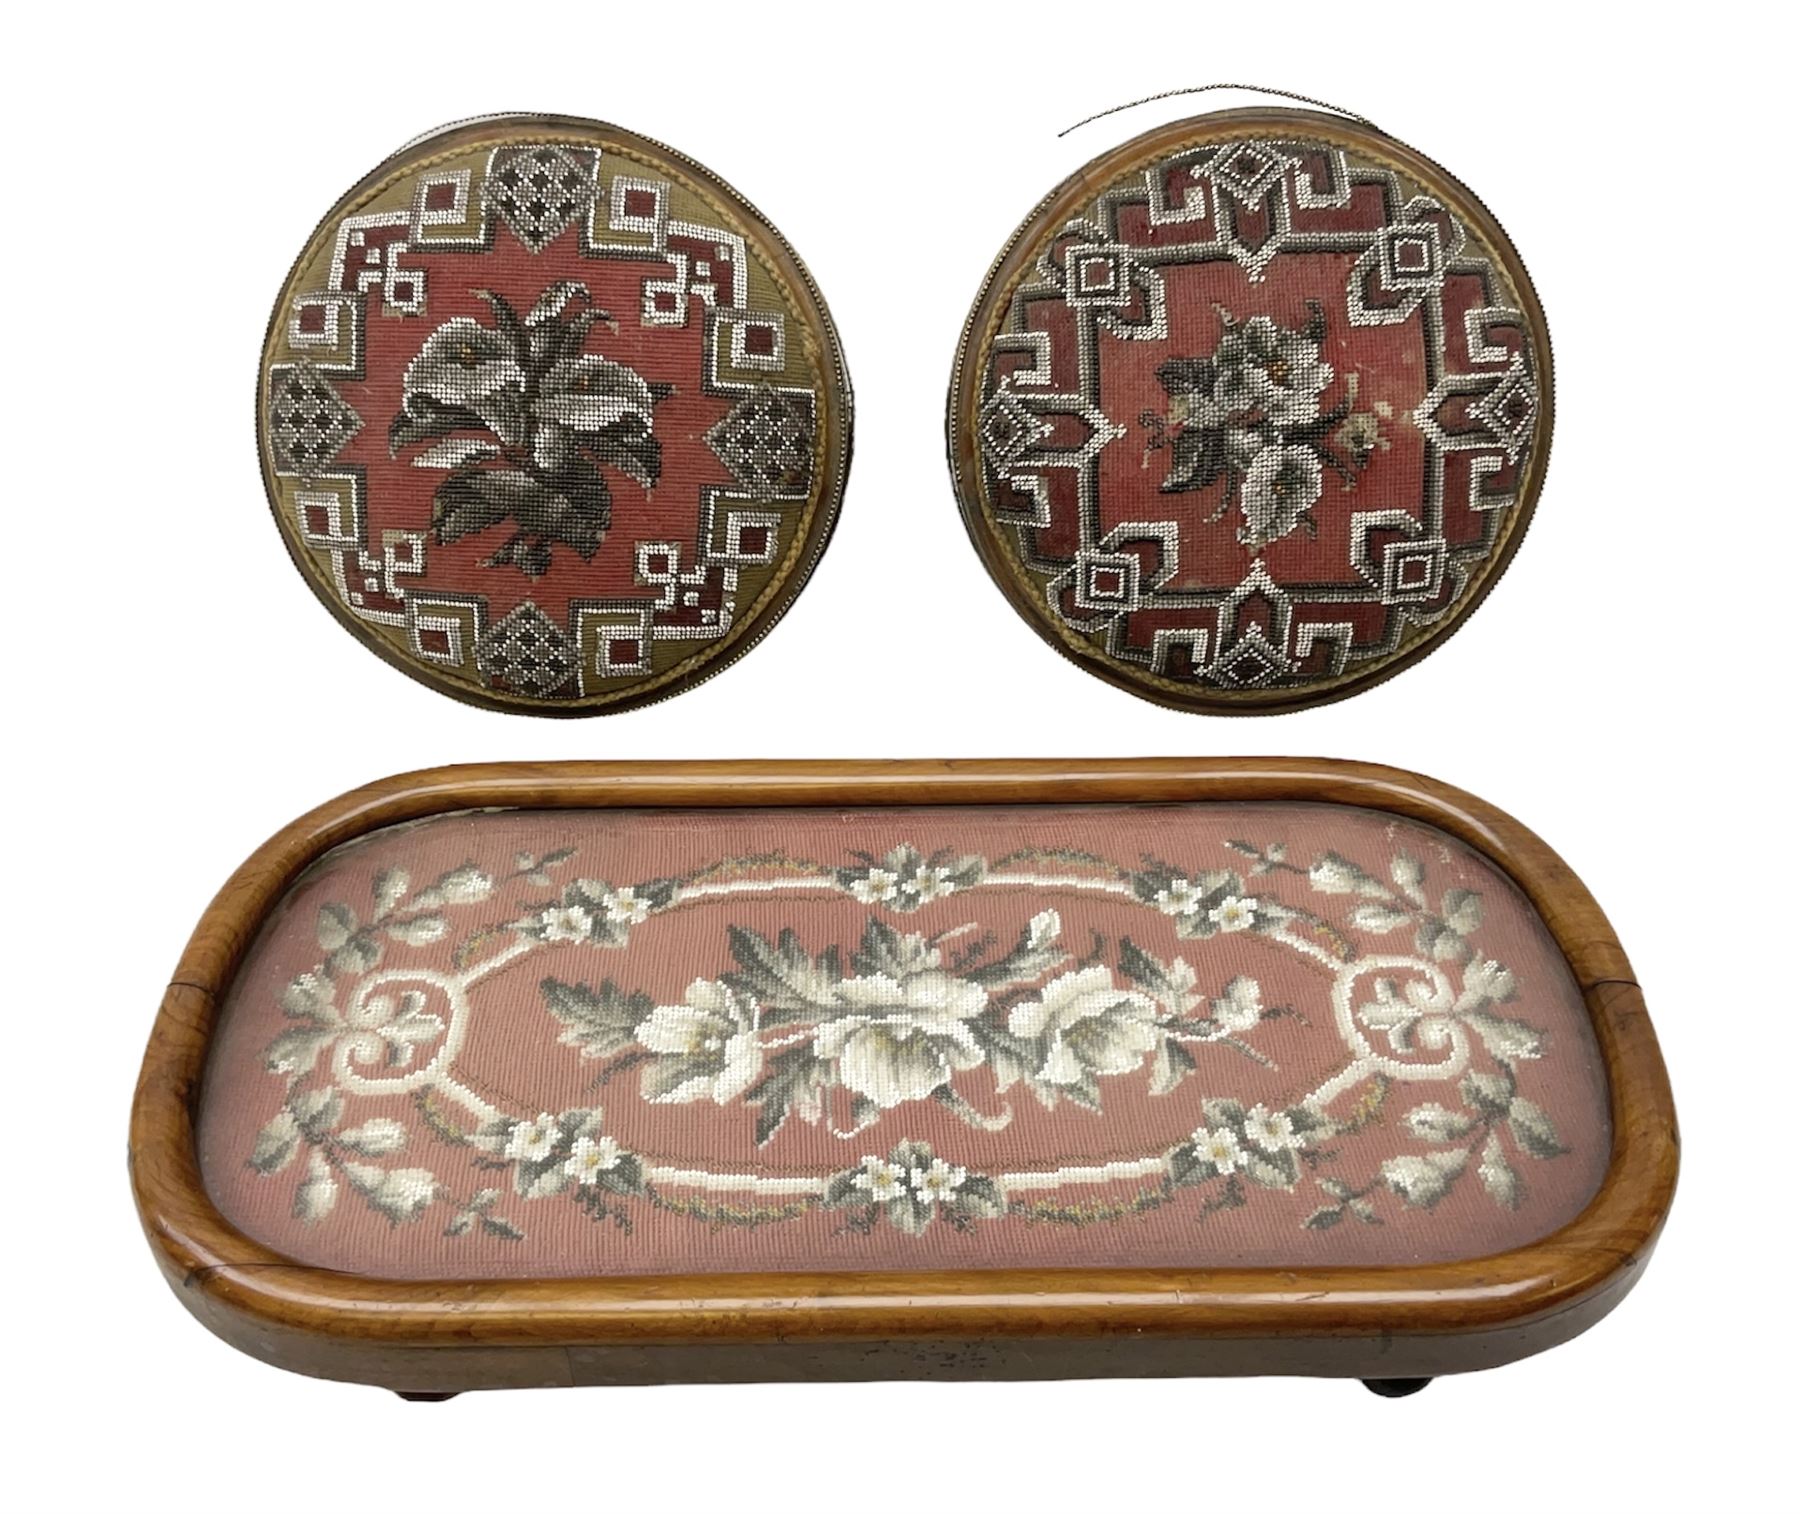 Pair of Victorian beadwork footstools of circular form with a beaded and needlework upholstery